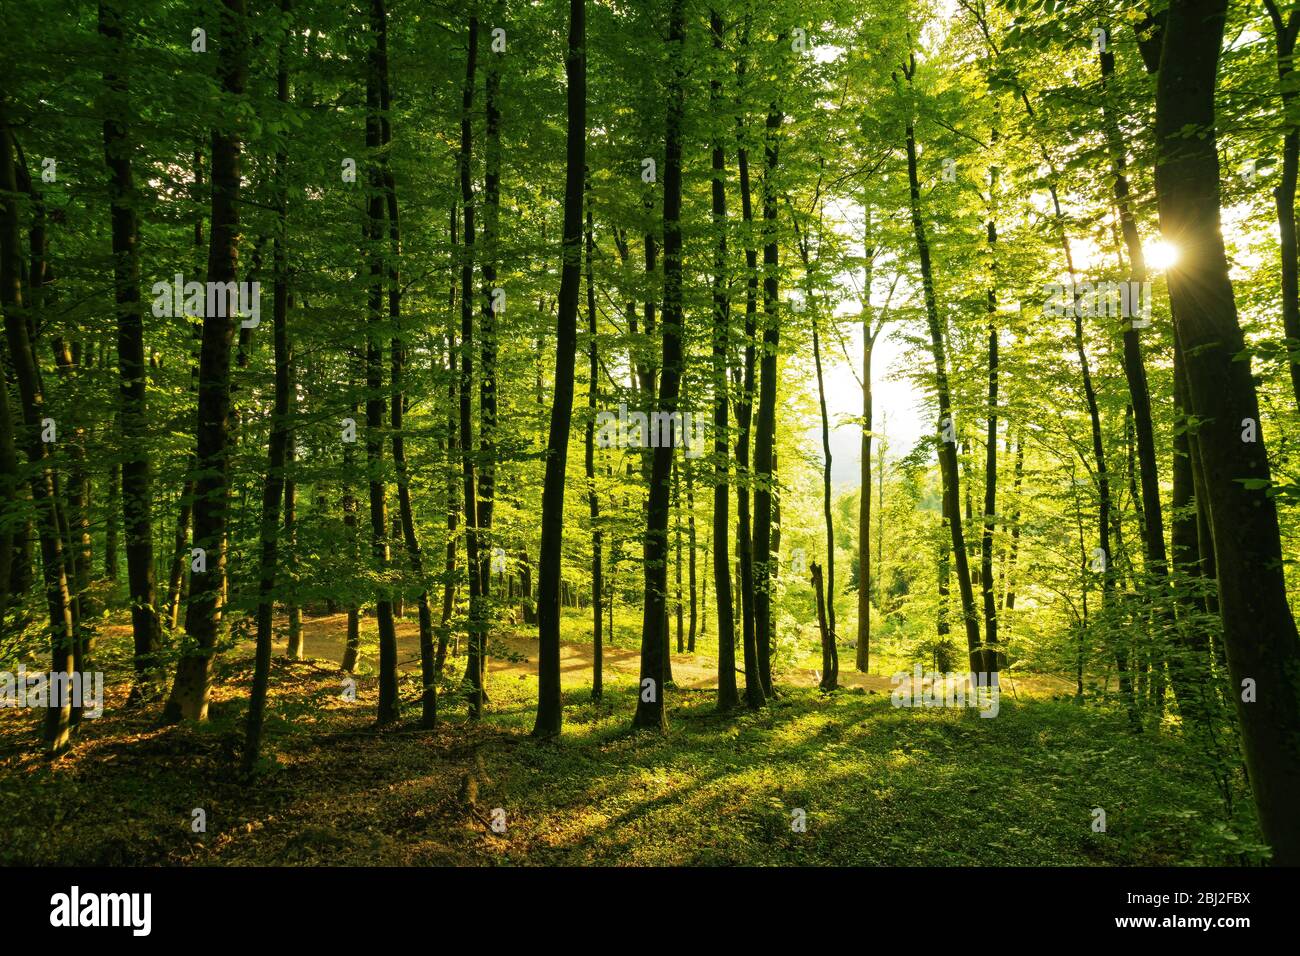 Springtime forest with setting sun shining through leaves and branches. Nature, forestry, habitat, environment and sustainability concepts Stock Photo